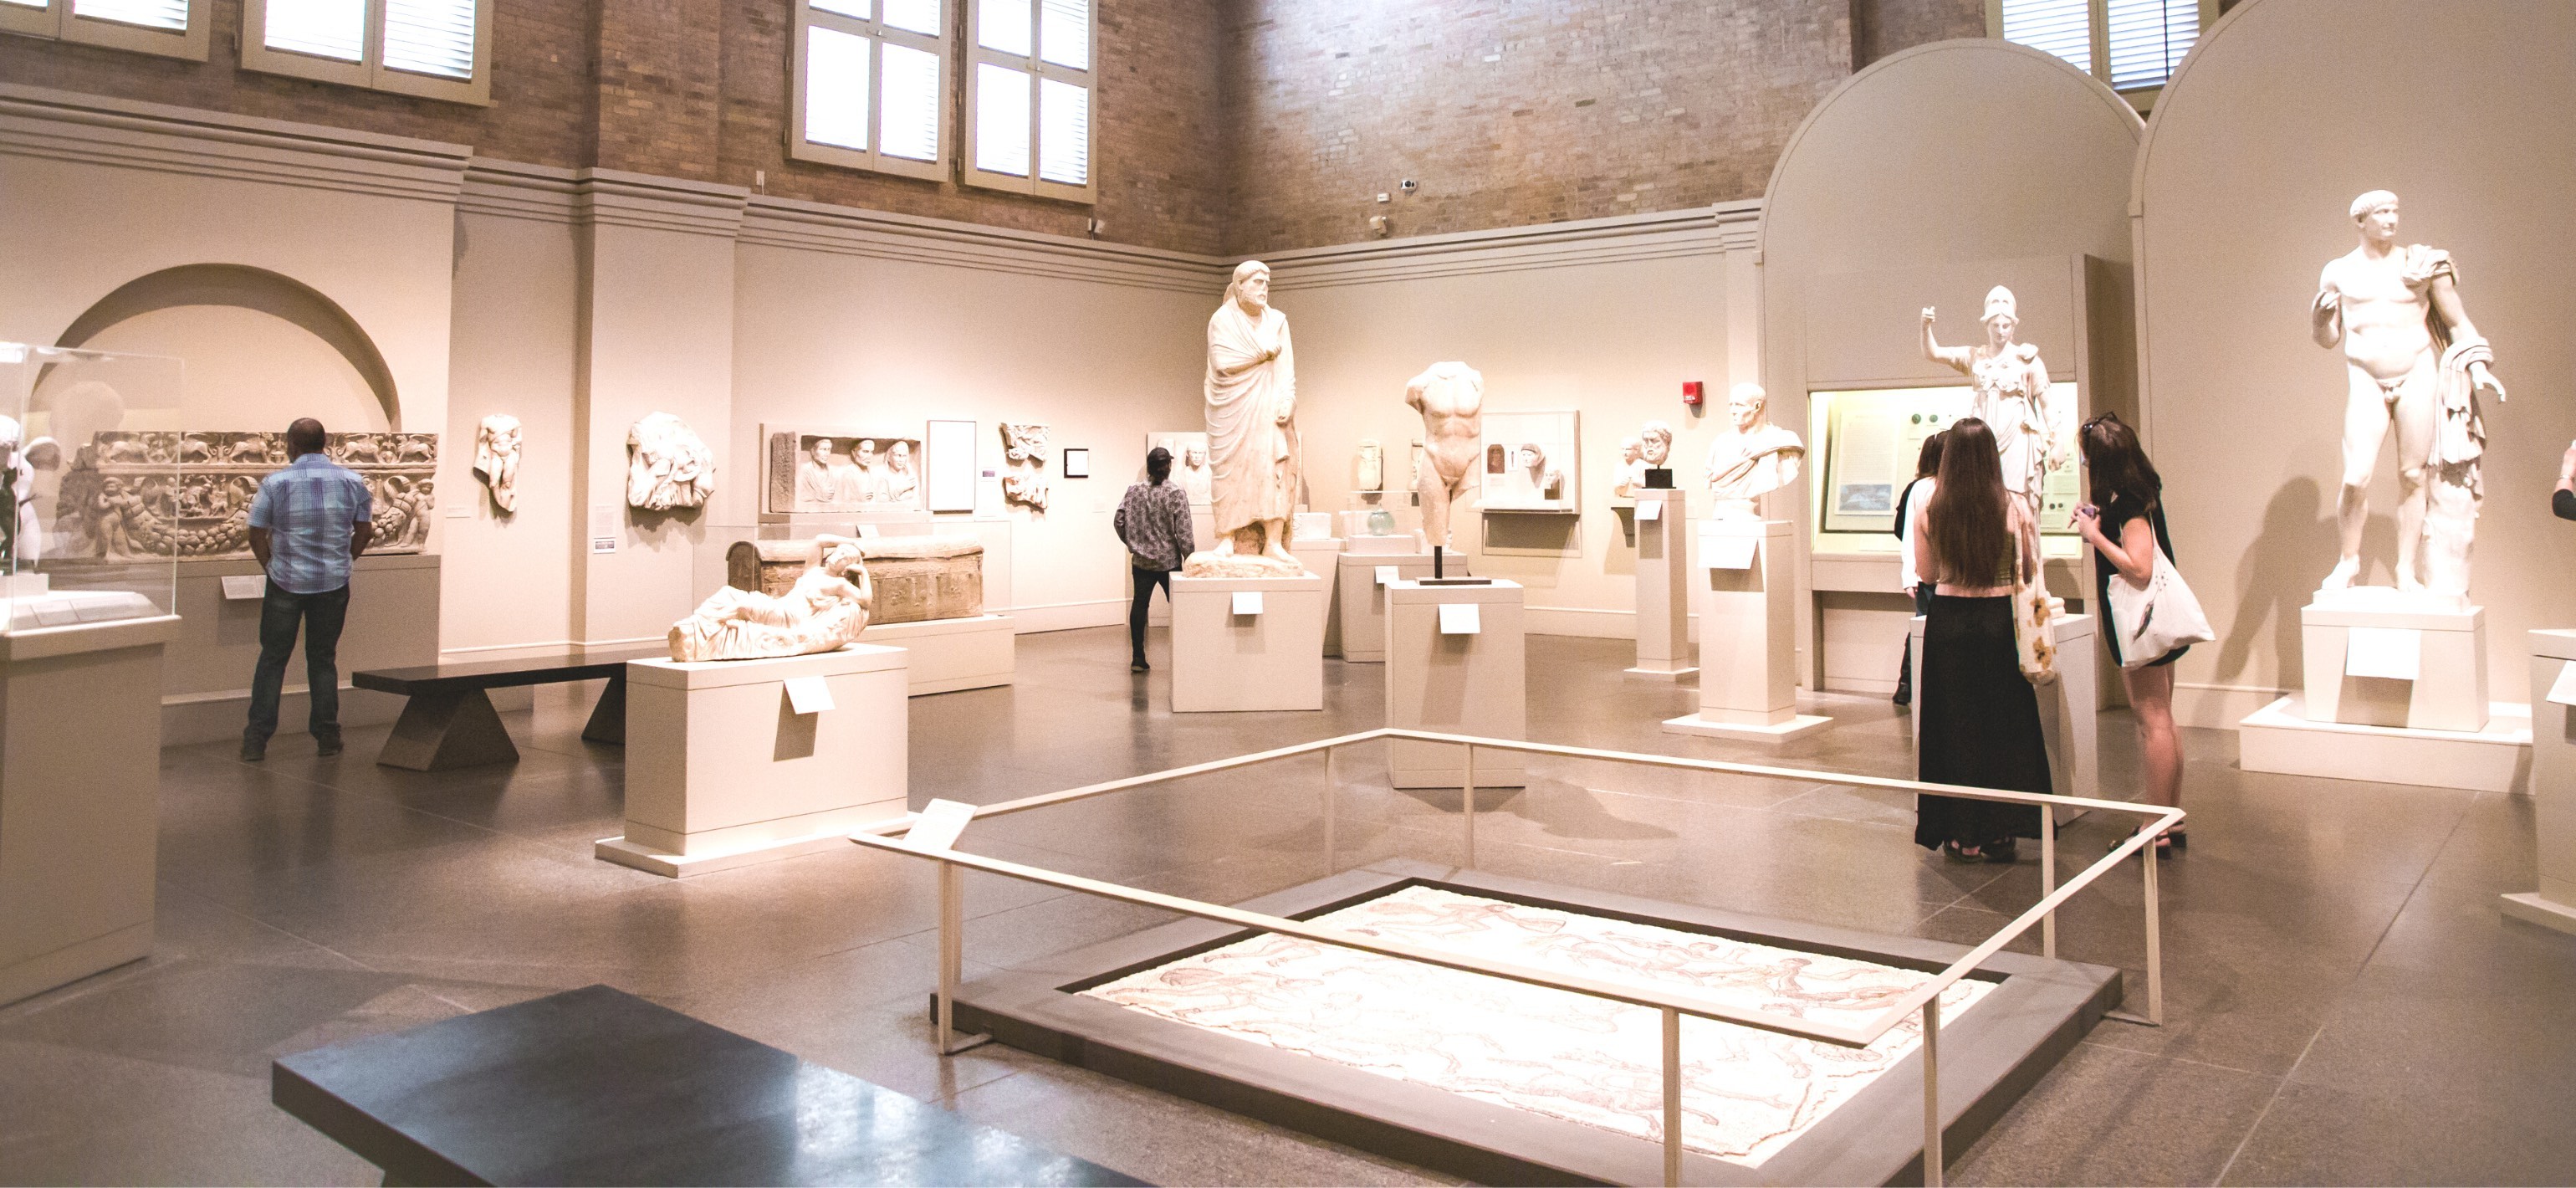 roman and greek statue gallery with people